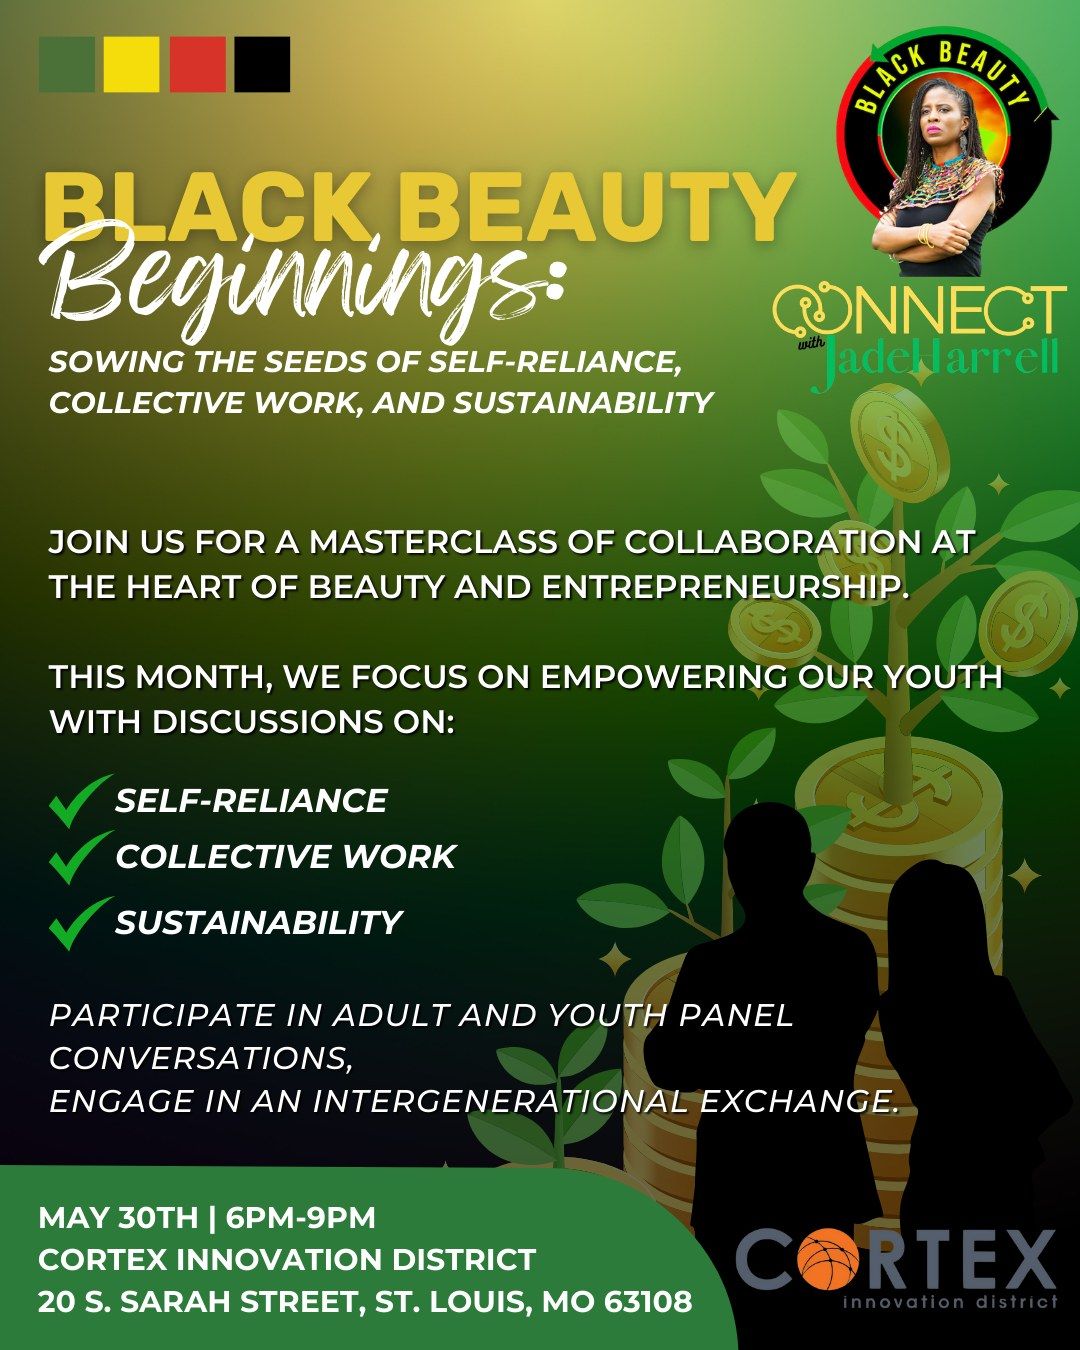 Black Beauty Beginnings: Sowing the seeds of Self Reliance, Collective work and Sustainability